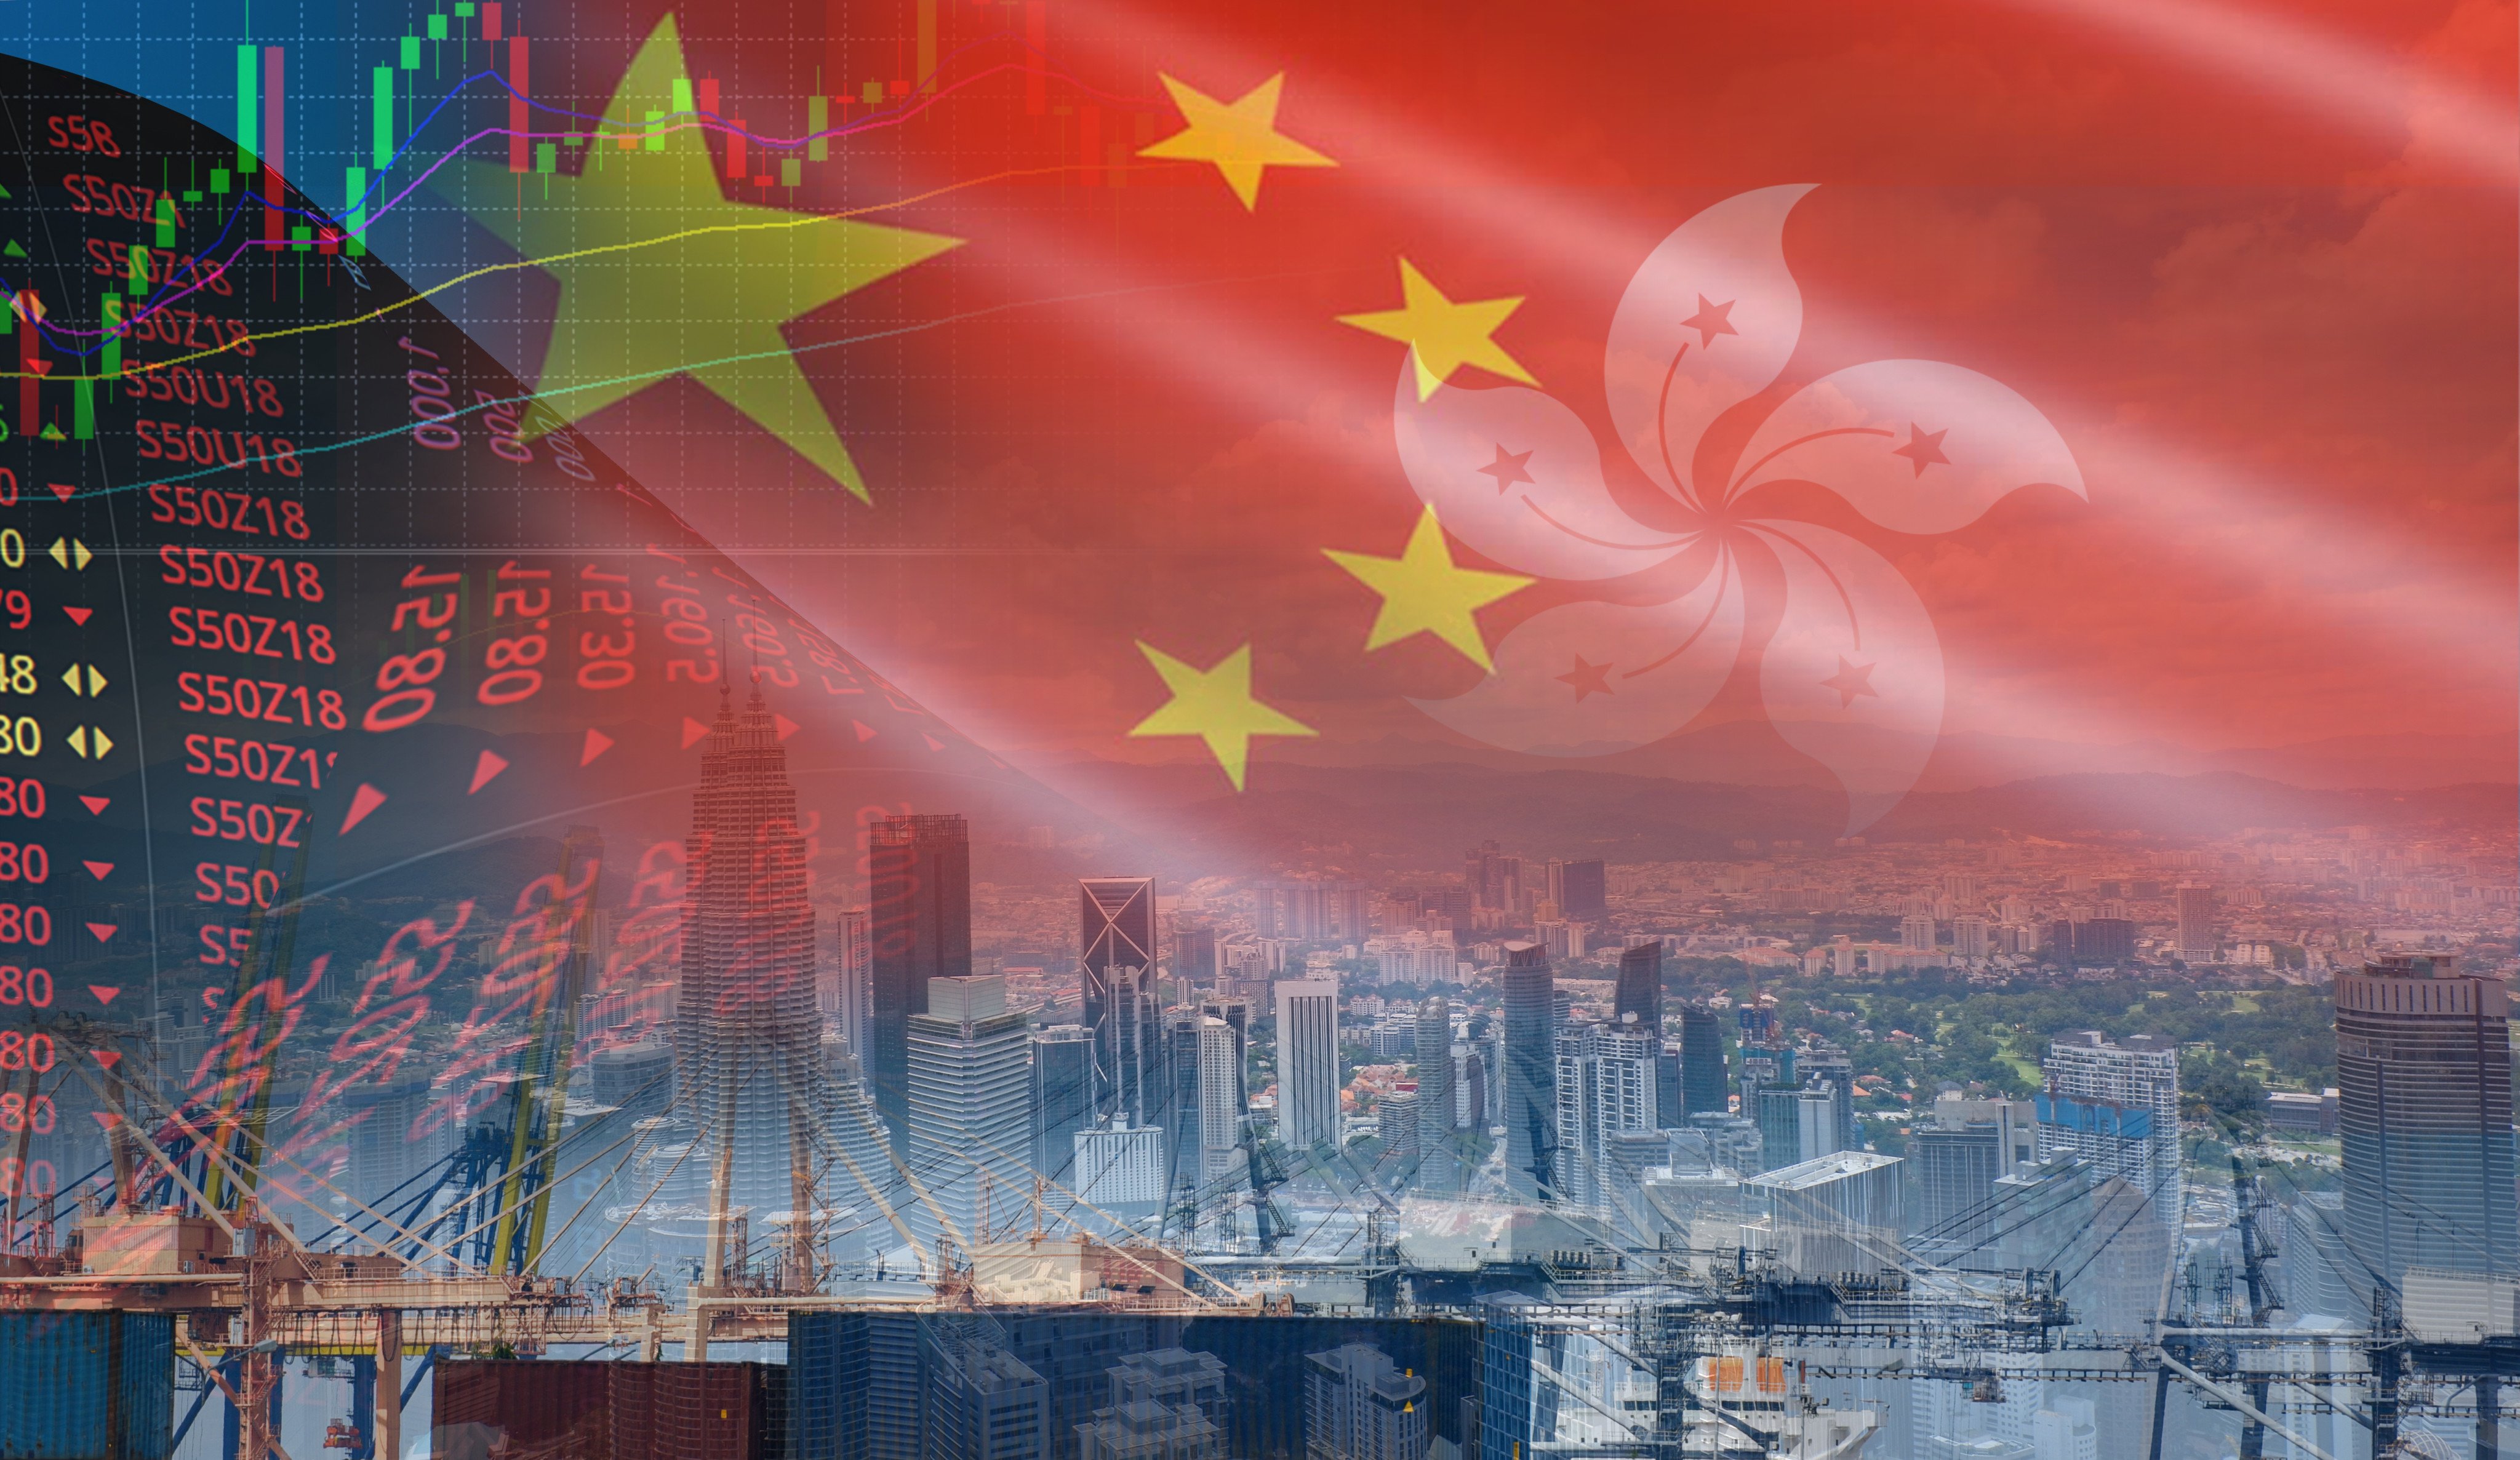 Acquisition is expected to make Guolian Securities a top 20 brokerage in mainland China. Photo: Shutterstock